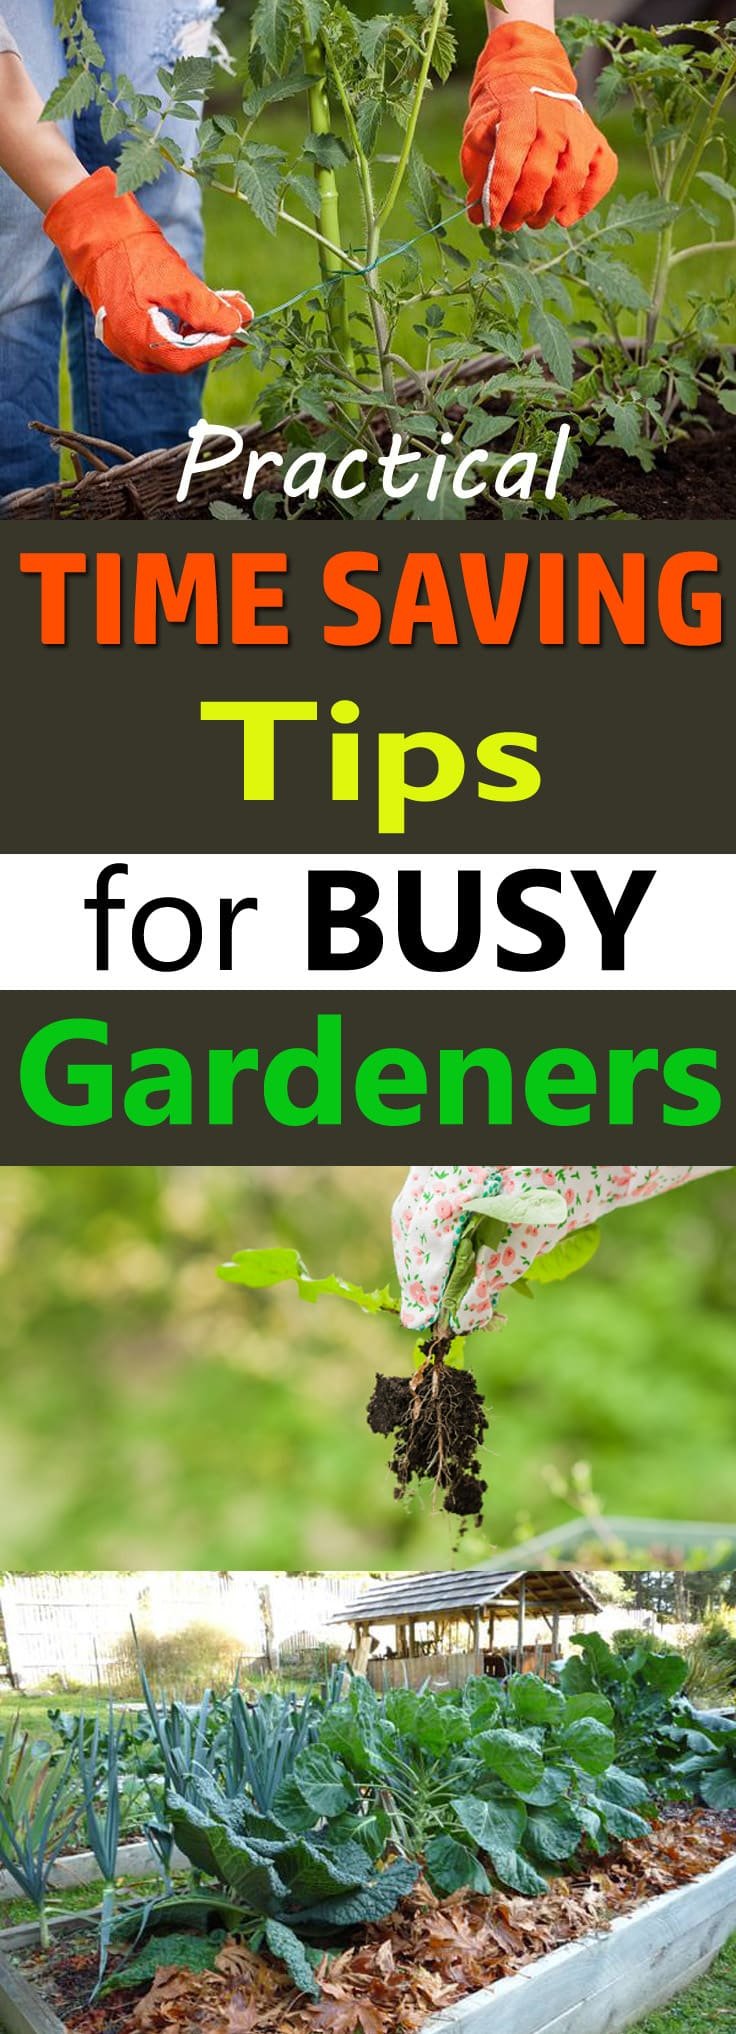 With these time saving tips for the garden, you can enjoy your garden more without working hard.